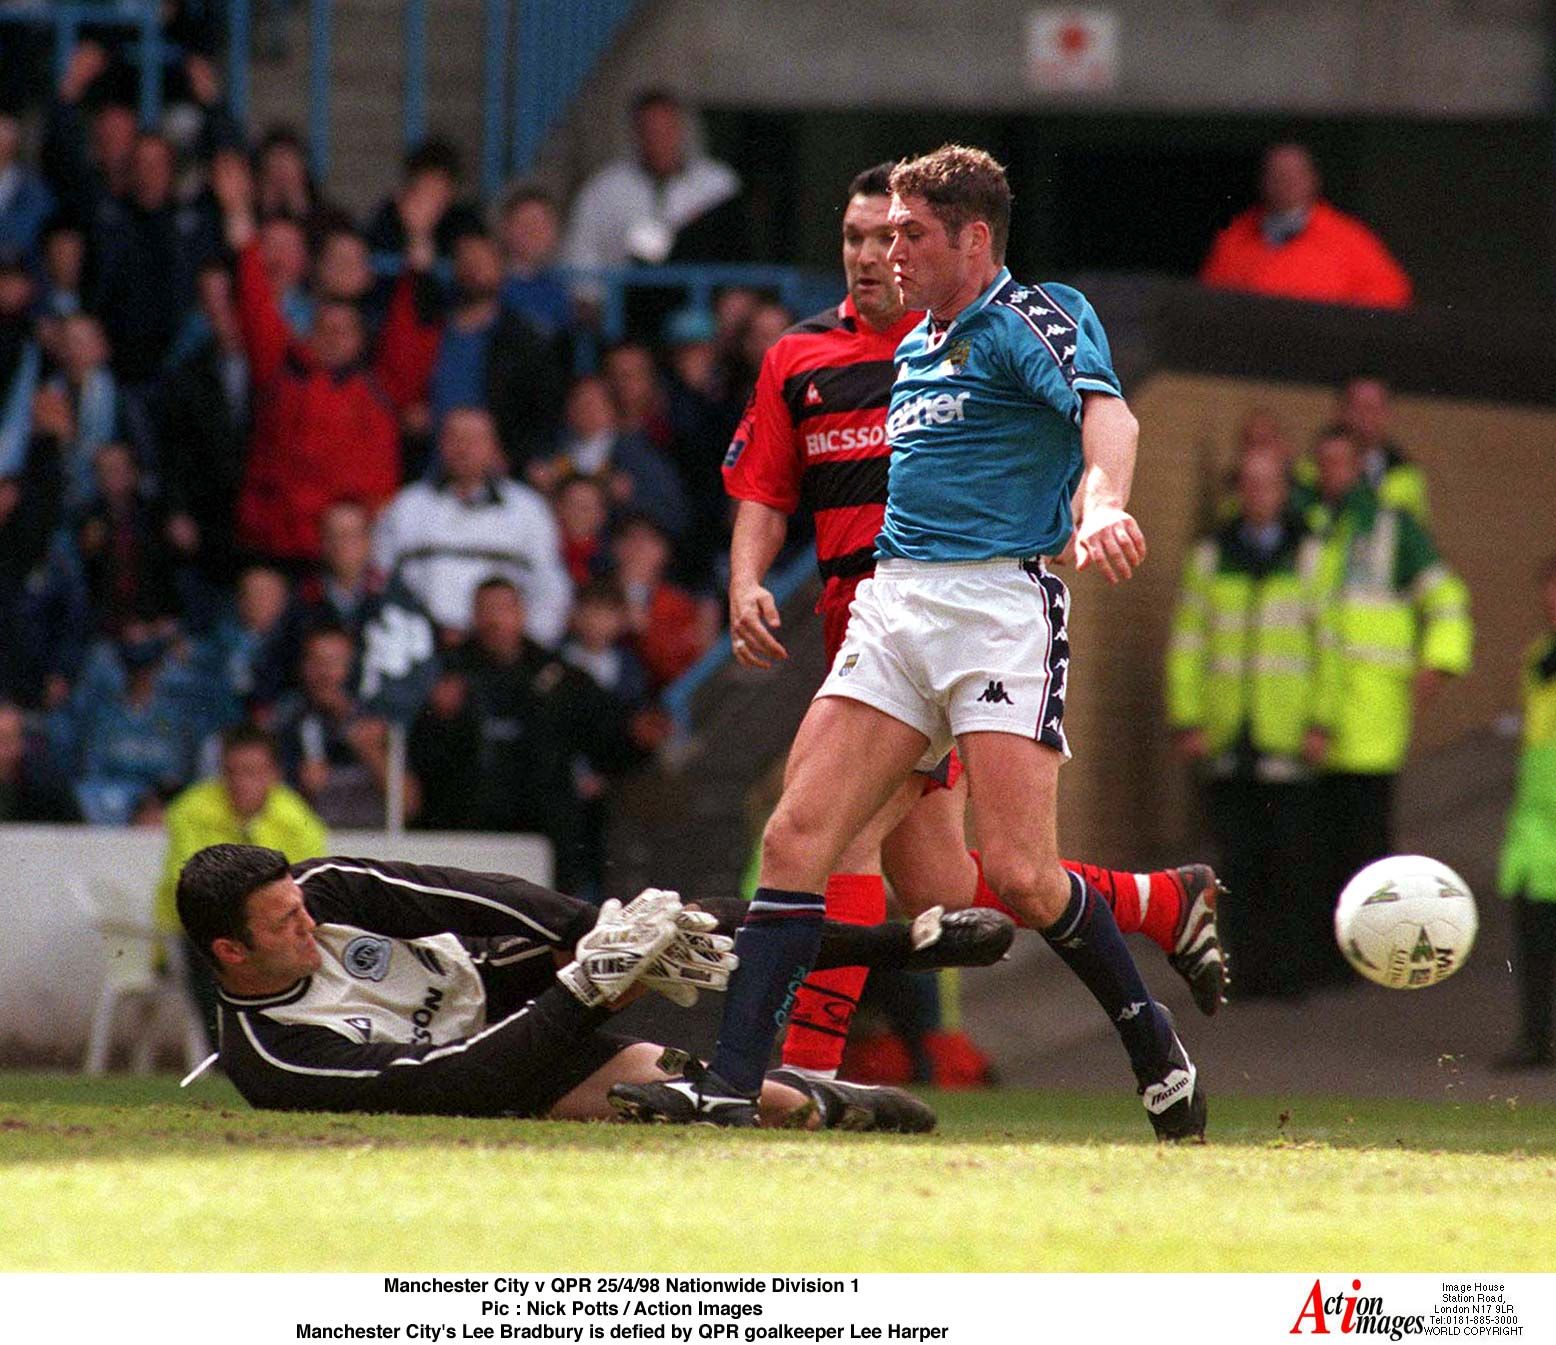 Manchester City v QPR 25/4/98 Nationwide Division 1 
Pic : Nick Potts / Action Images 
Manchester City's Lee Bradbury is defied by QPR goalkeeper Lee Harper 
Queens Park Rangers